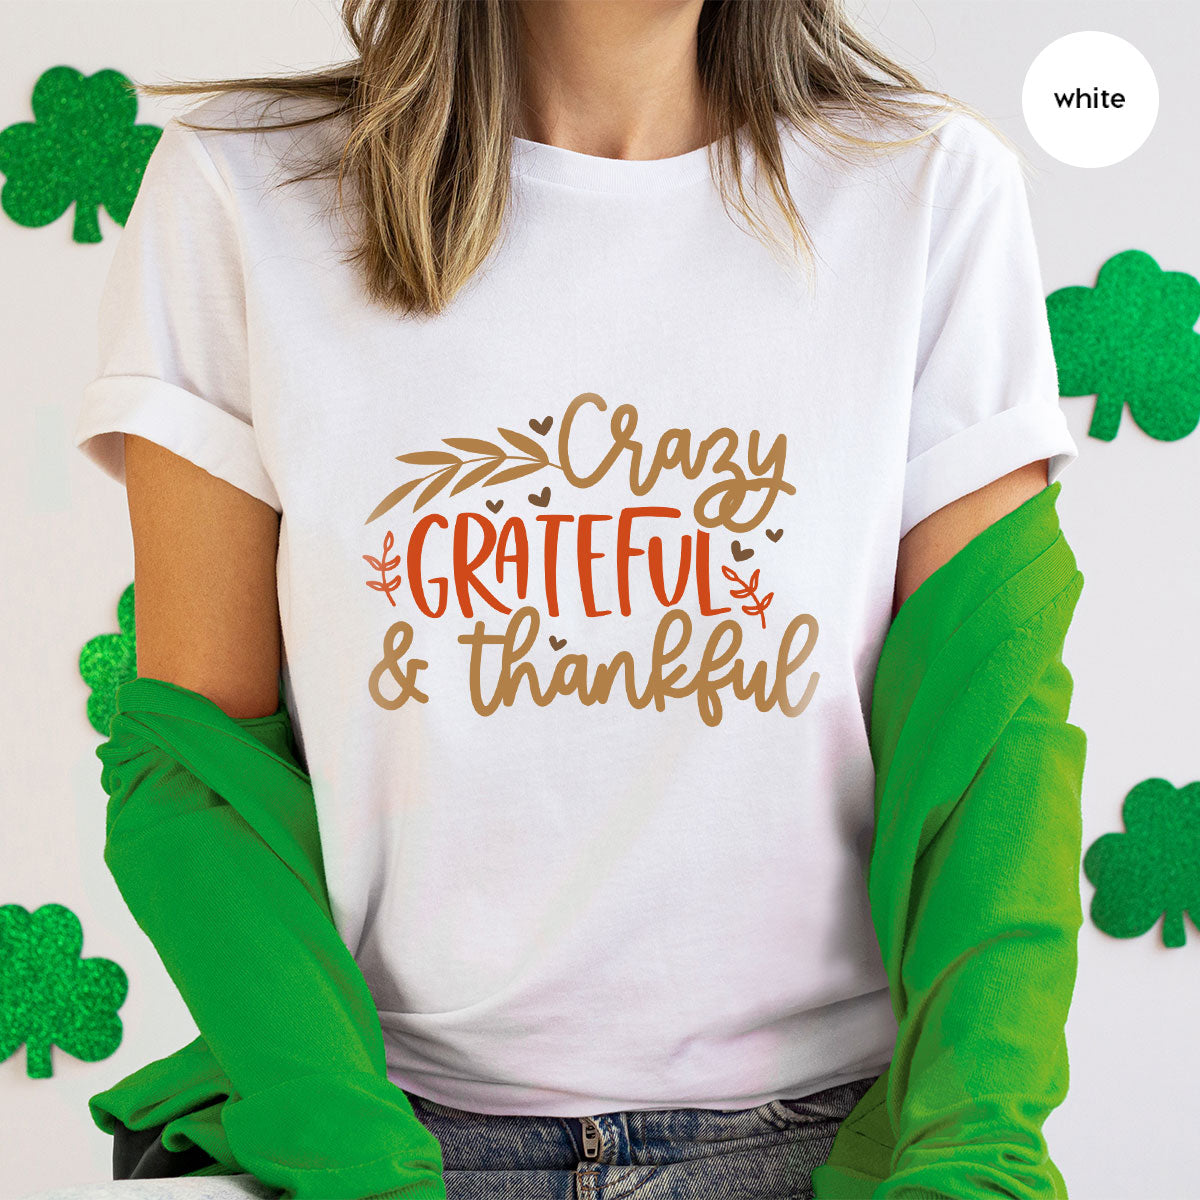 Funny Fall T Shirt, Gift for Her, Crazy Grateful Thankful T-Shirt, Autumn Clothing, Happy Thanksgiving TShirts, Leaves Graphic Tees